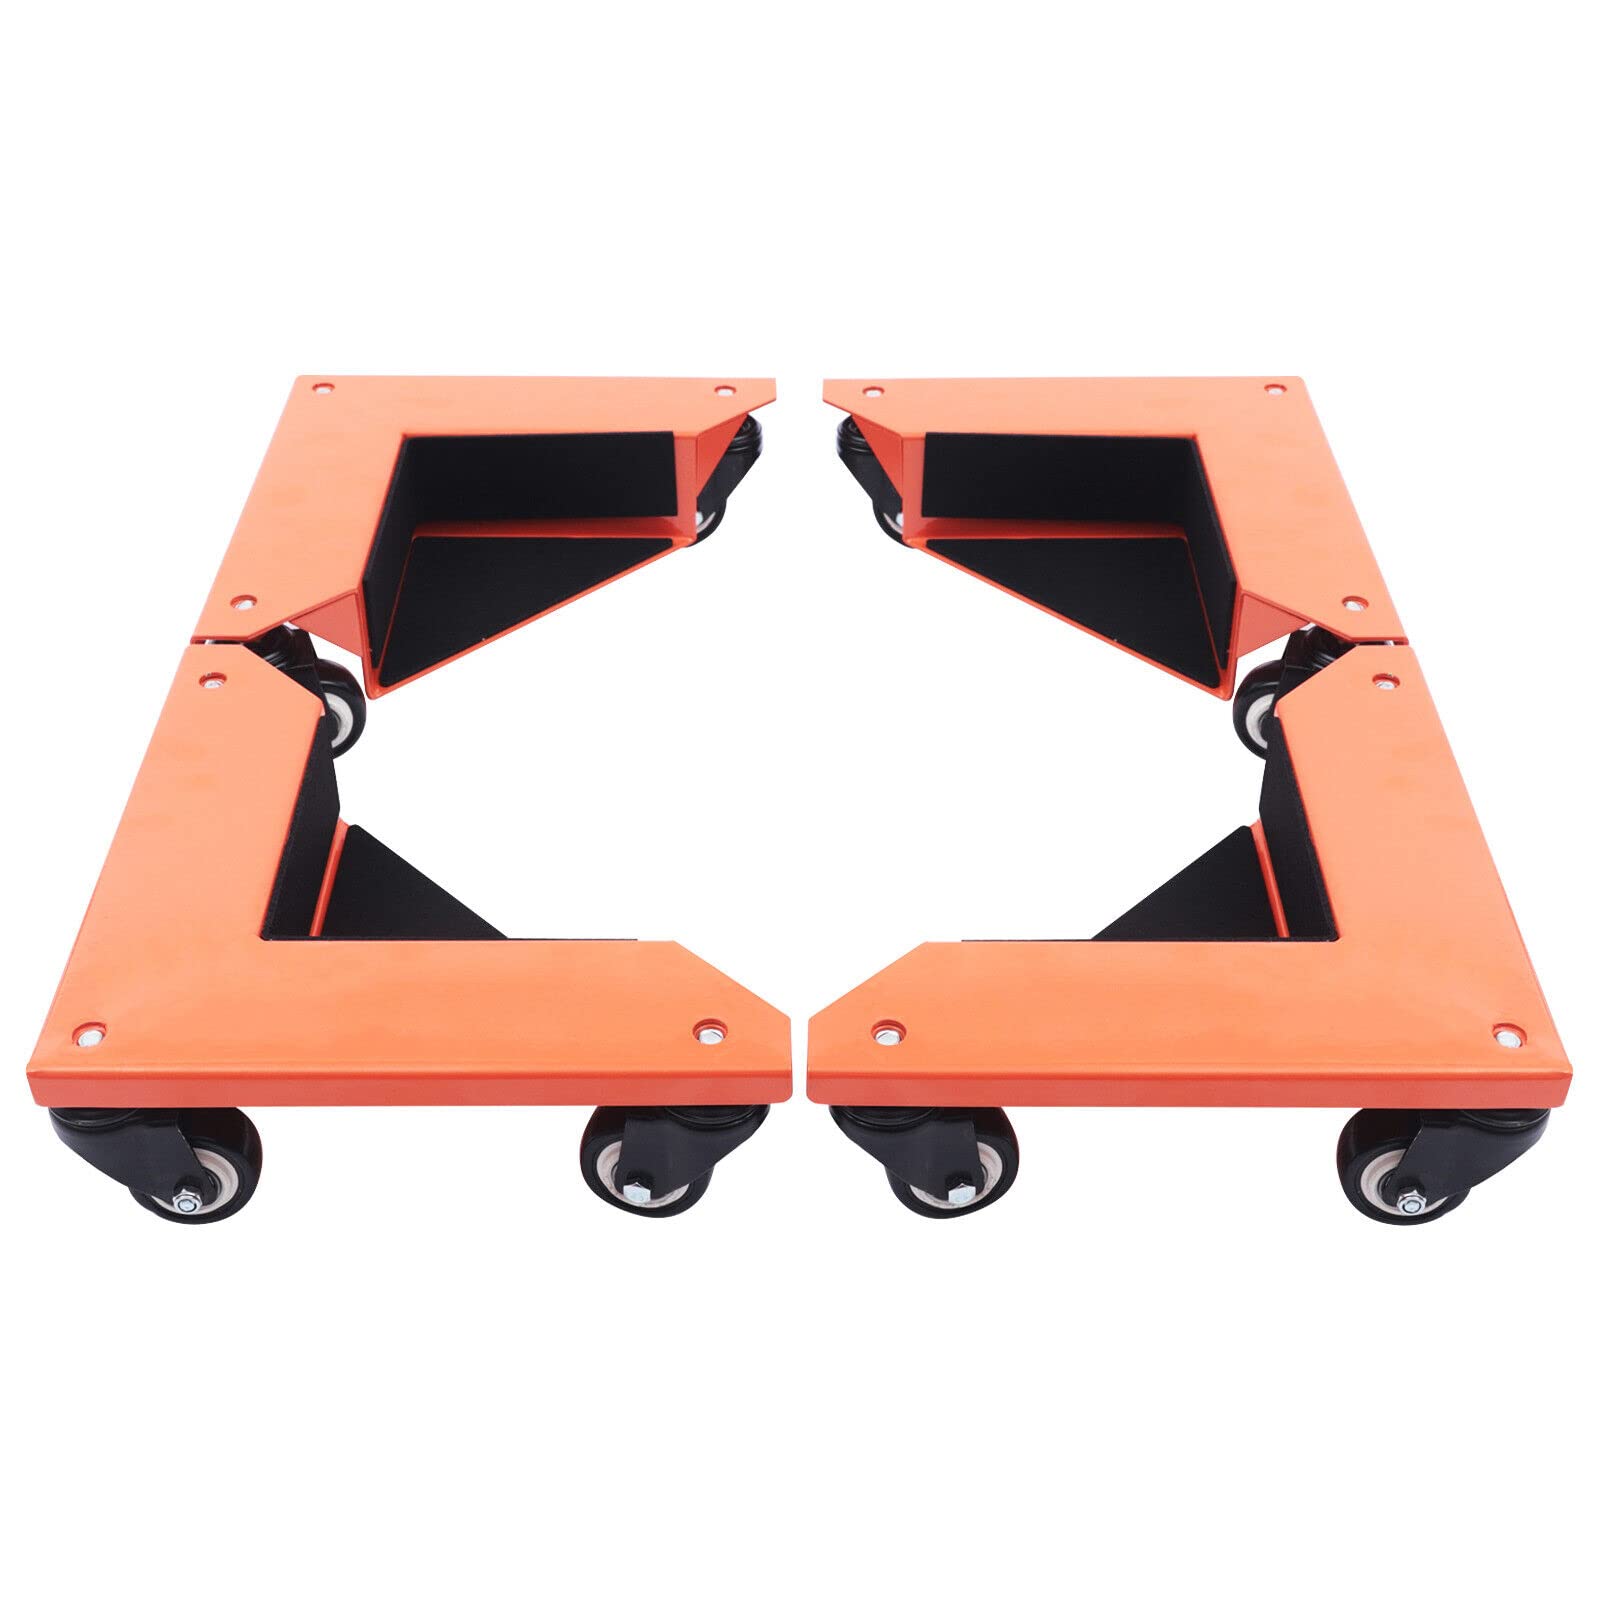 4 x 3 ruote Dolly Roller, 650 kg